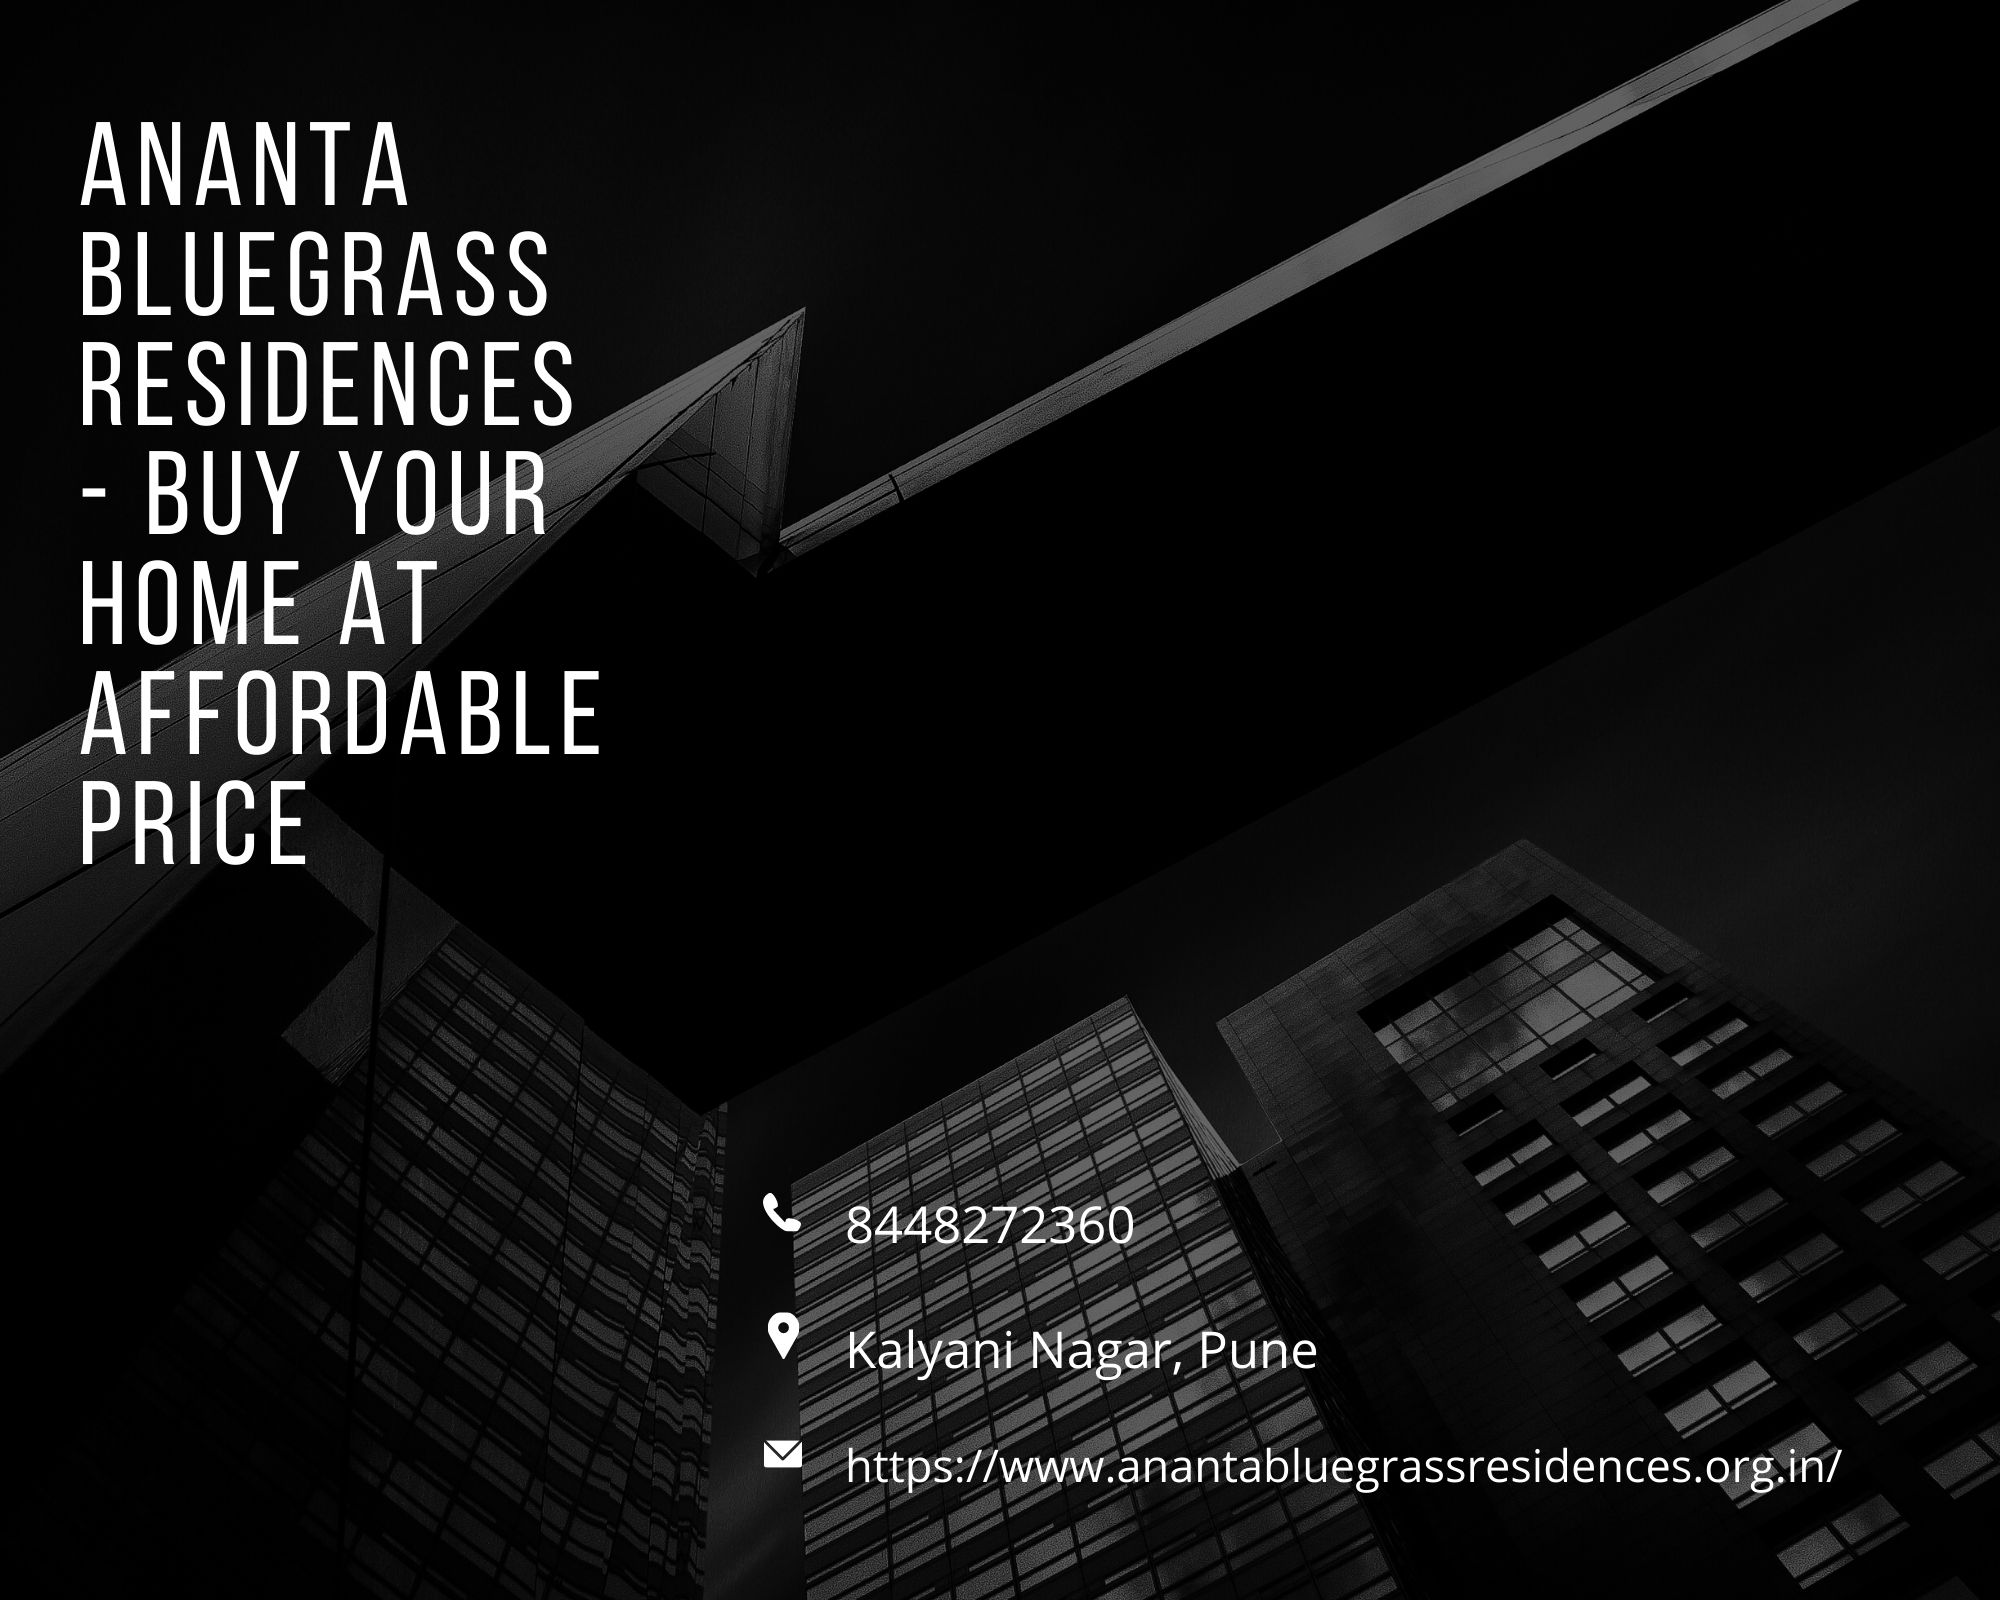 Ananta Bluegrass Residences - Buy Your Home At Affordable Price